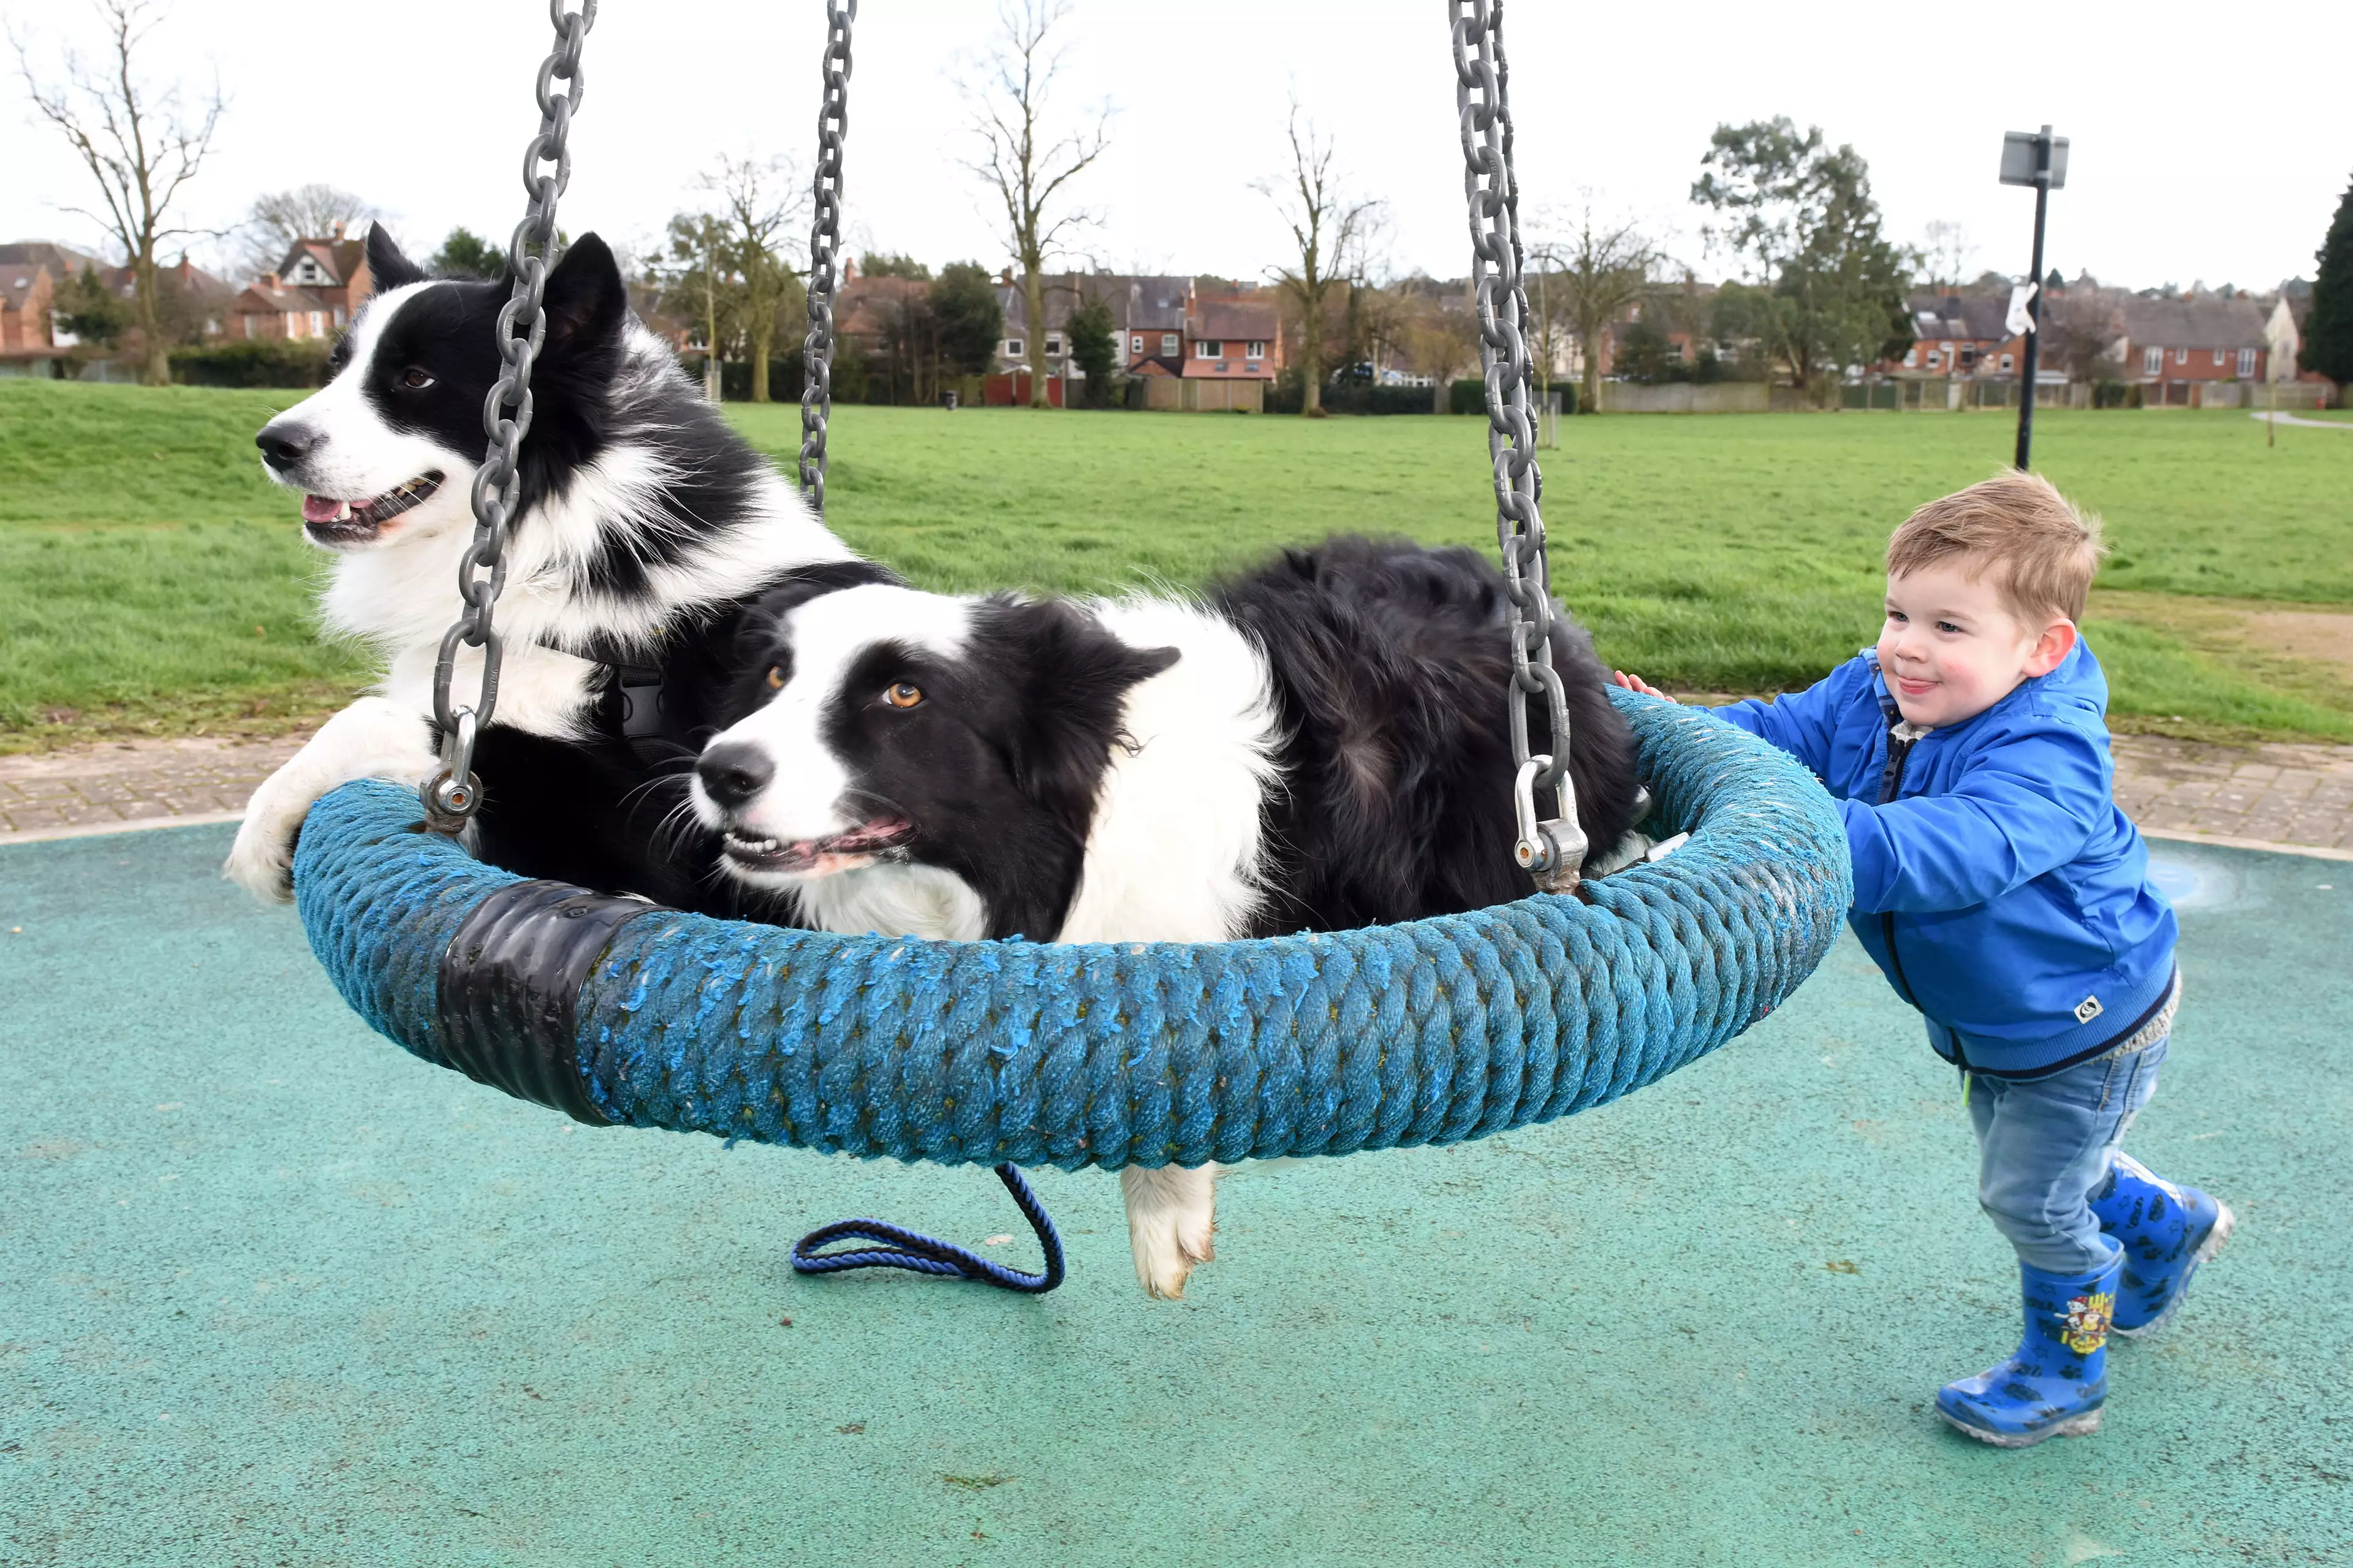 Jenson pushes Fenn and Nova on the swing in the park.